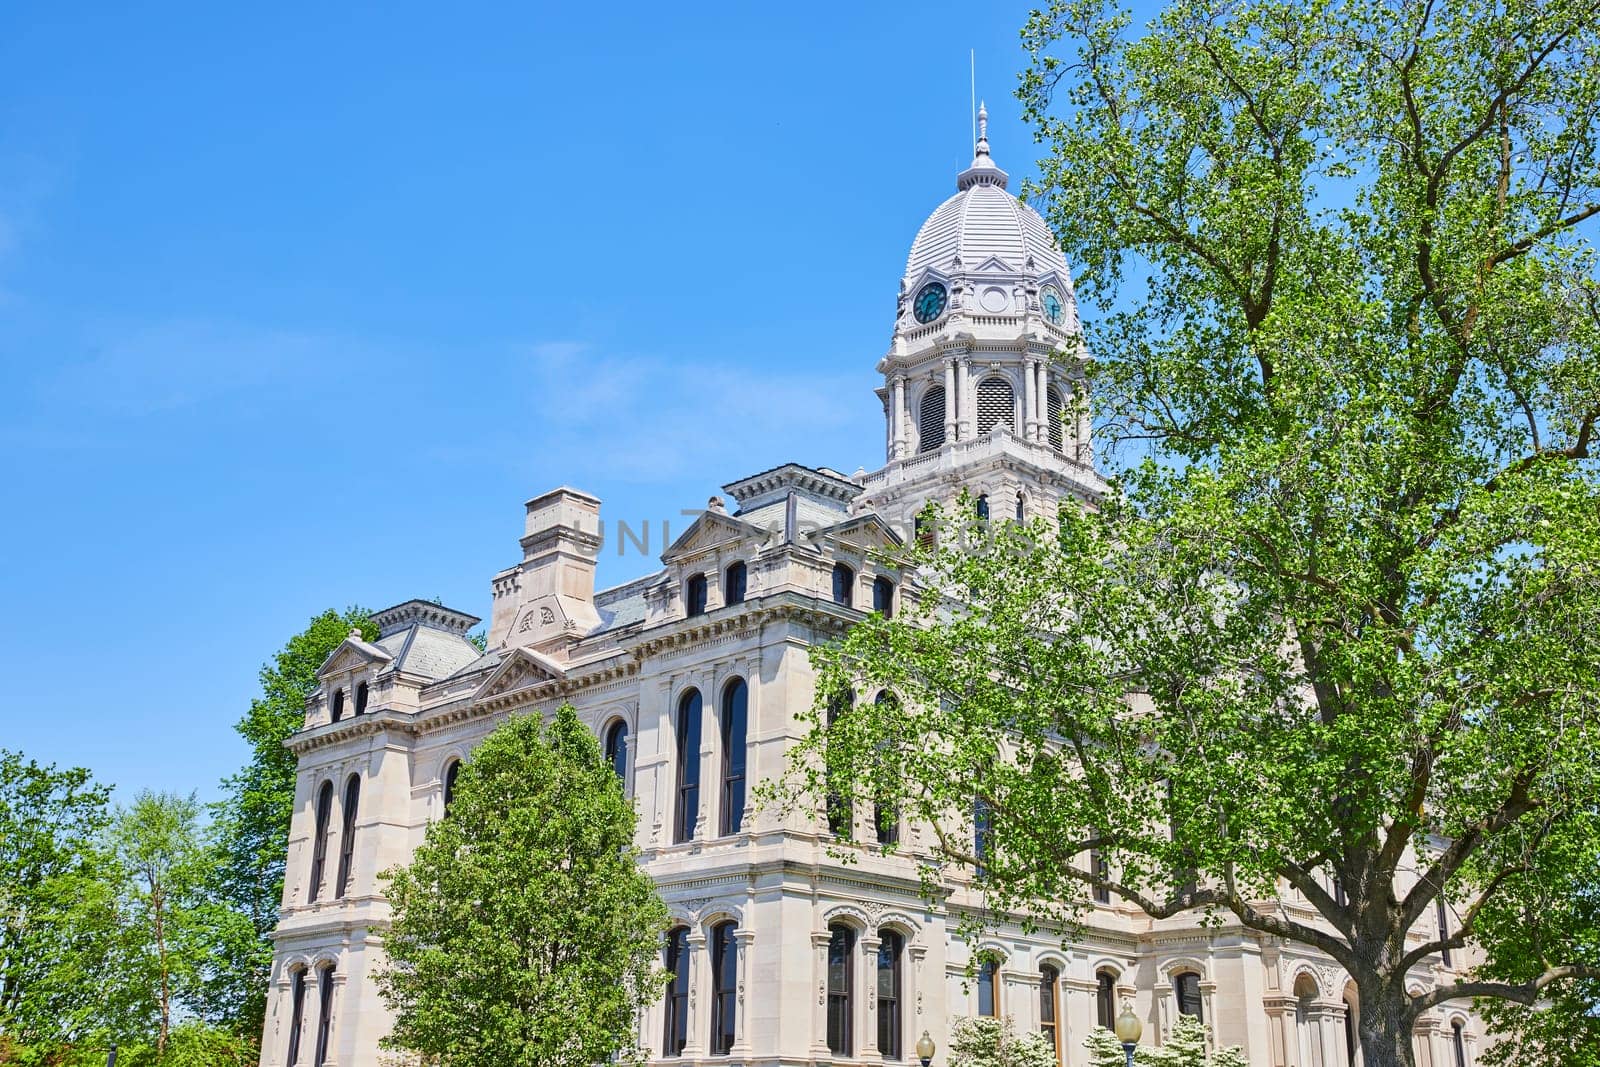 Bright sunlight bathes the classical architecture of Kosciusko County Courthouse against a clear blue sky.